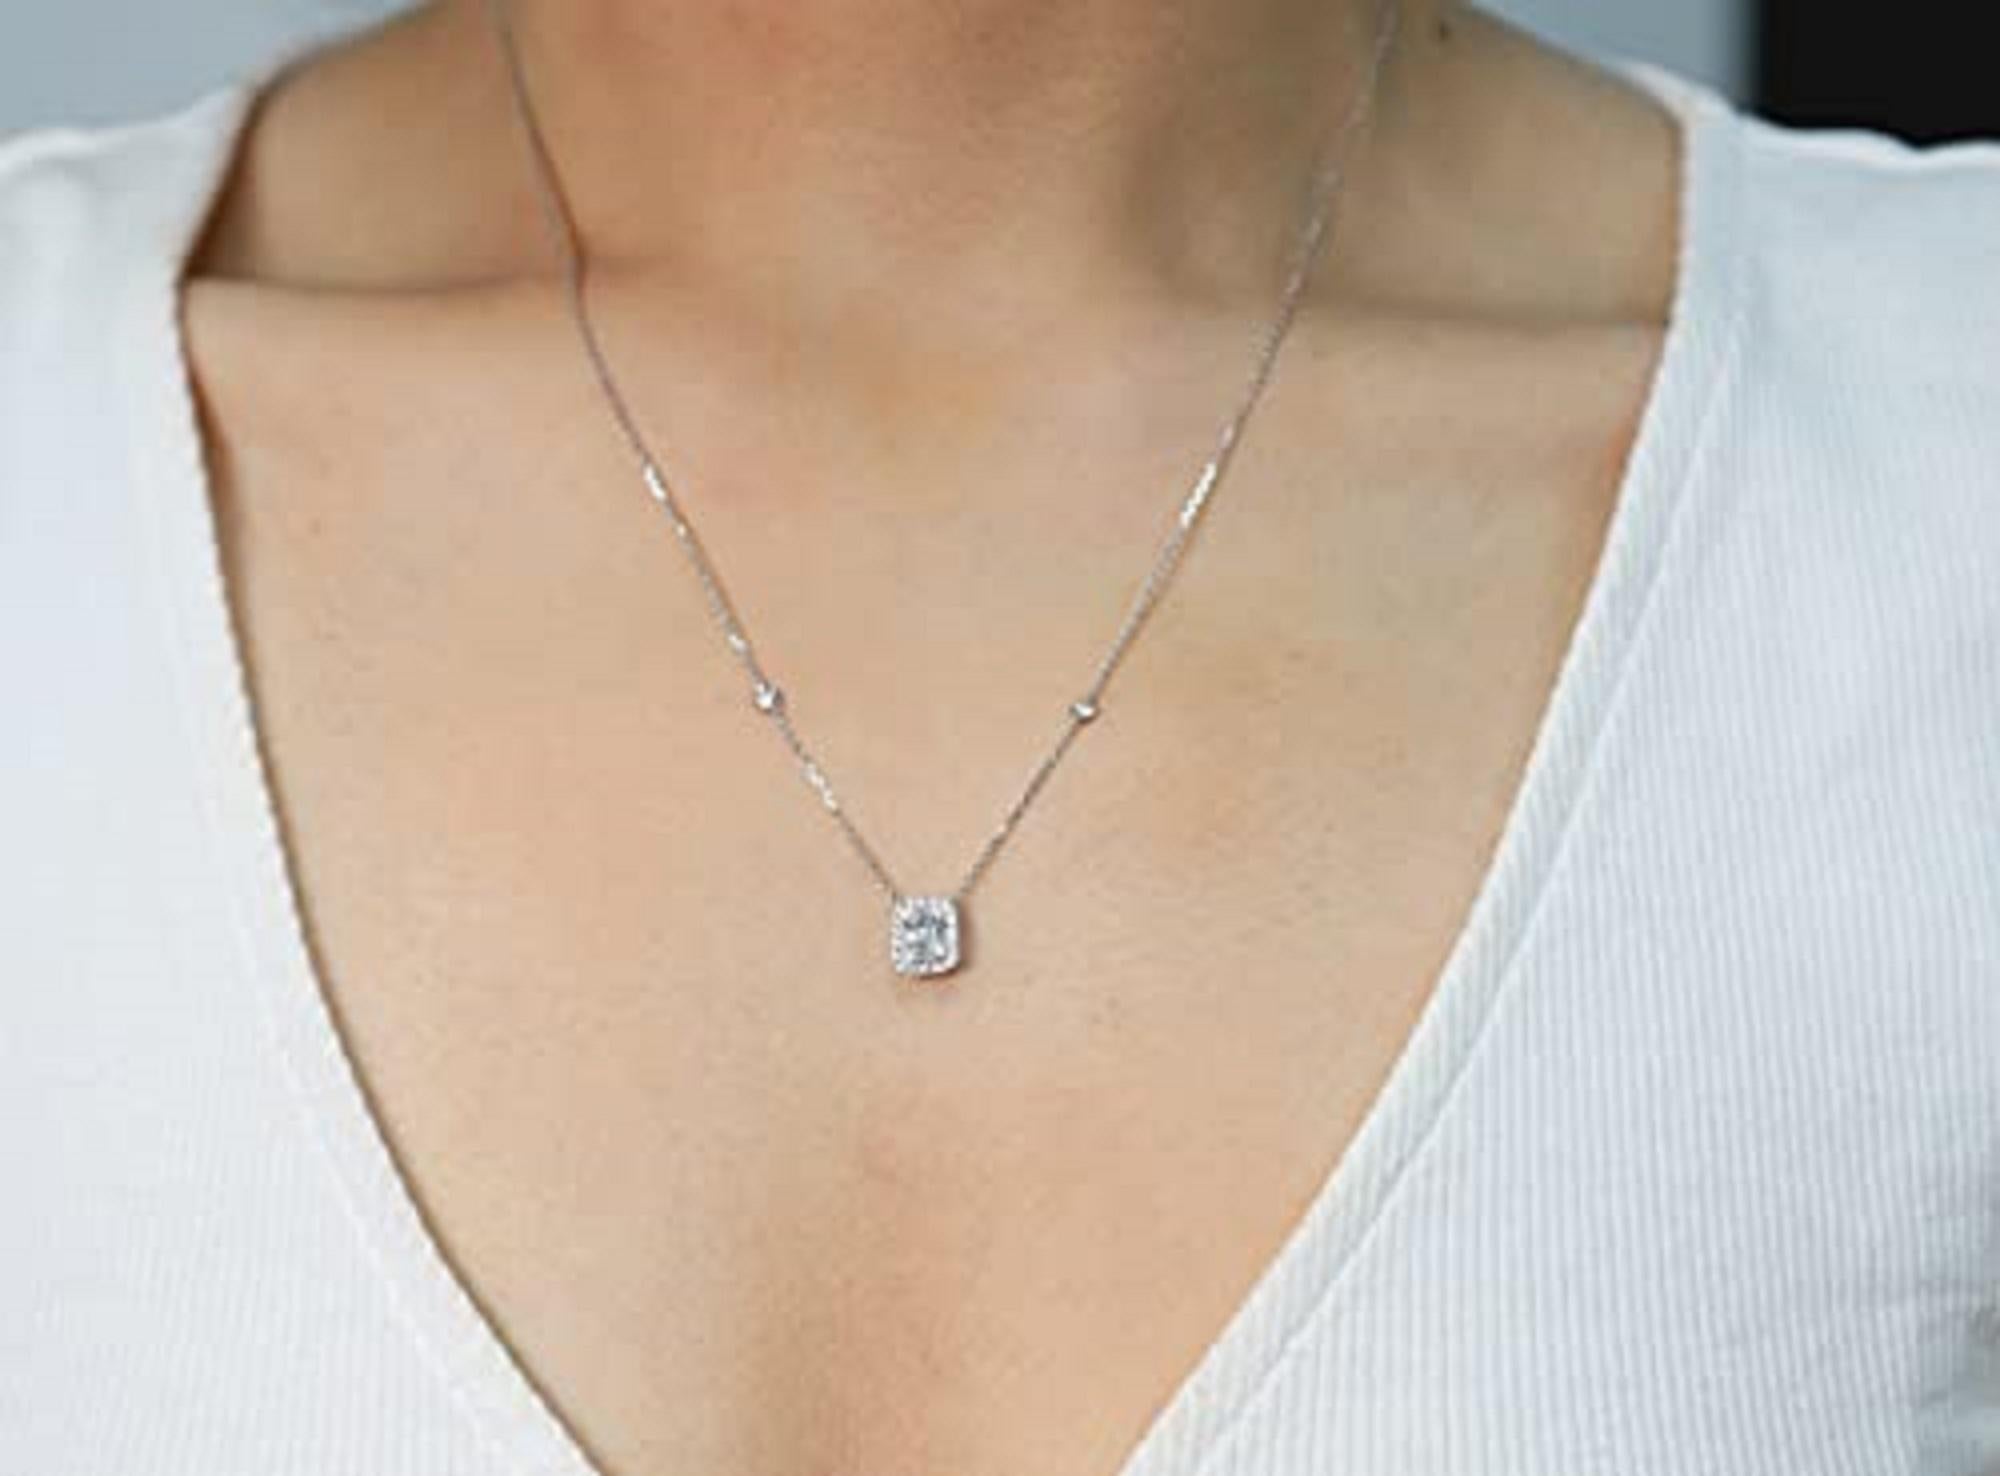 Stunning, timeless and classy eternity Unique Necklace. Decorate yourself in luxury with this Gin & Grace Necklace. The 14K White Gold jewelry boasts Round-Cut Prong Setting Natural White Diamond (24 pcs) 0.18 Carat and Baguette Shape Diamonds (5